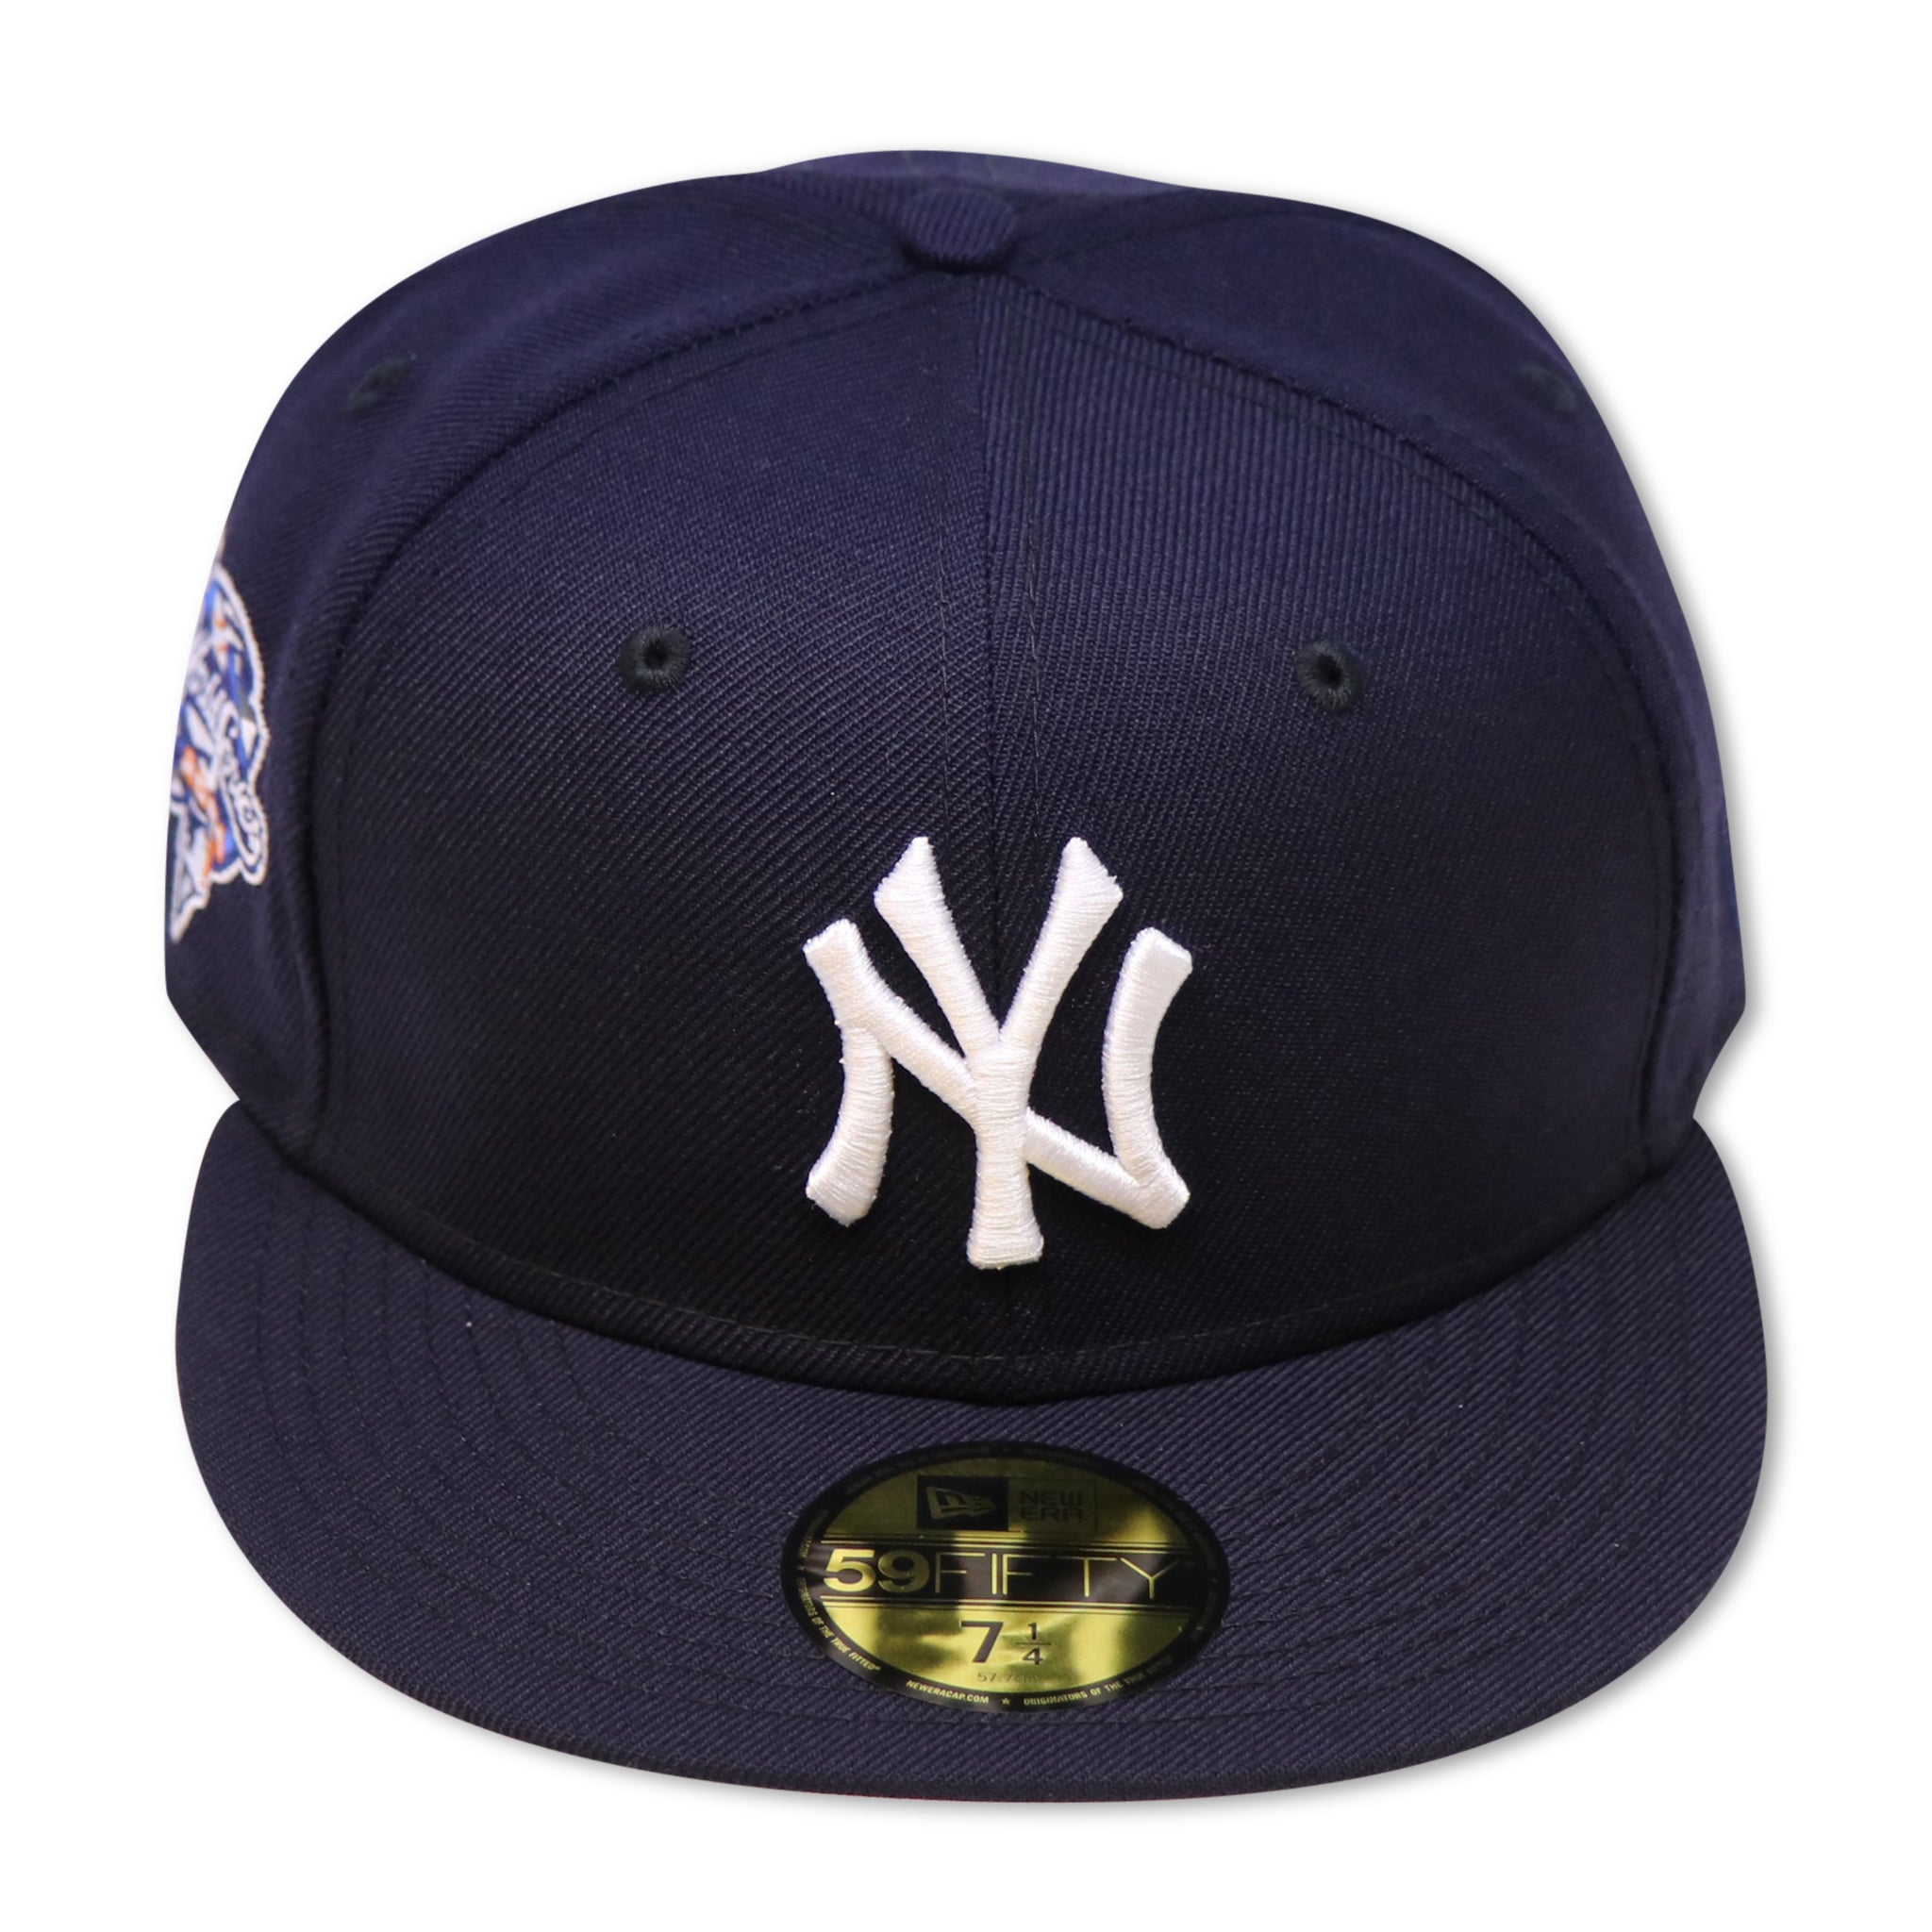 NEW YORK YANKEES "2000 WORLDSERIES" NEW ERA 59FIFTY FITTED ( SKY BLUE BOTTOM)